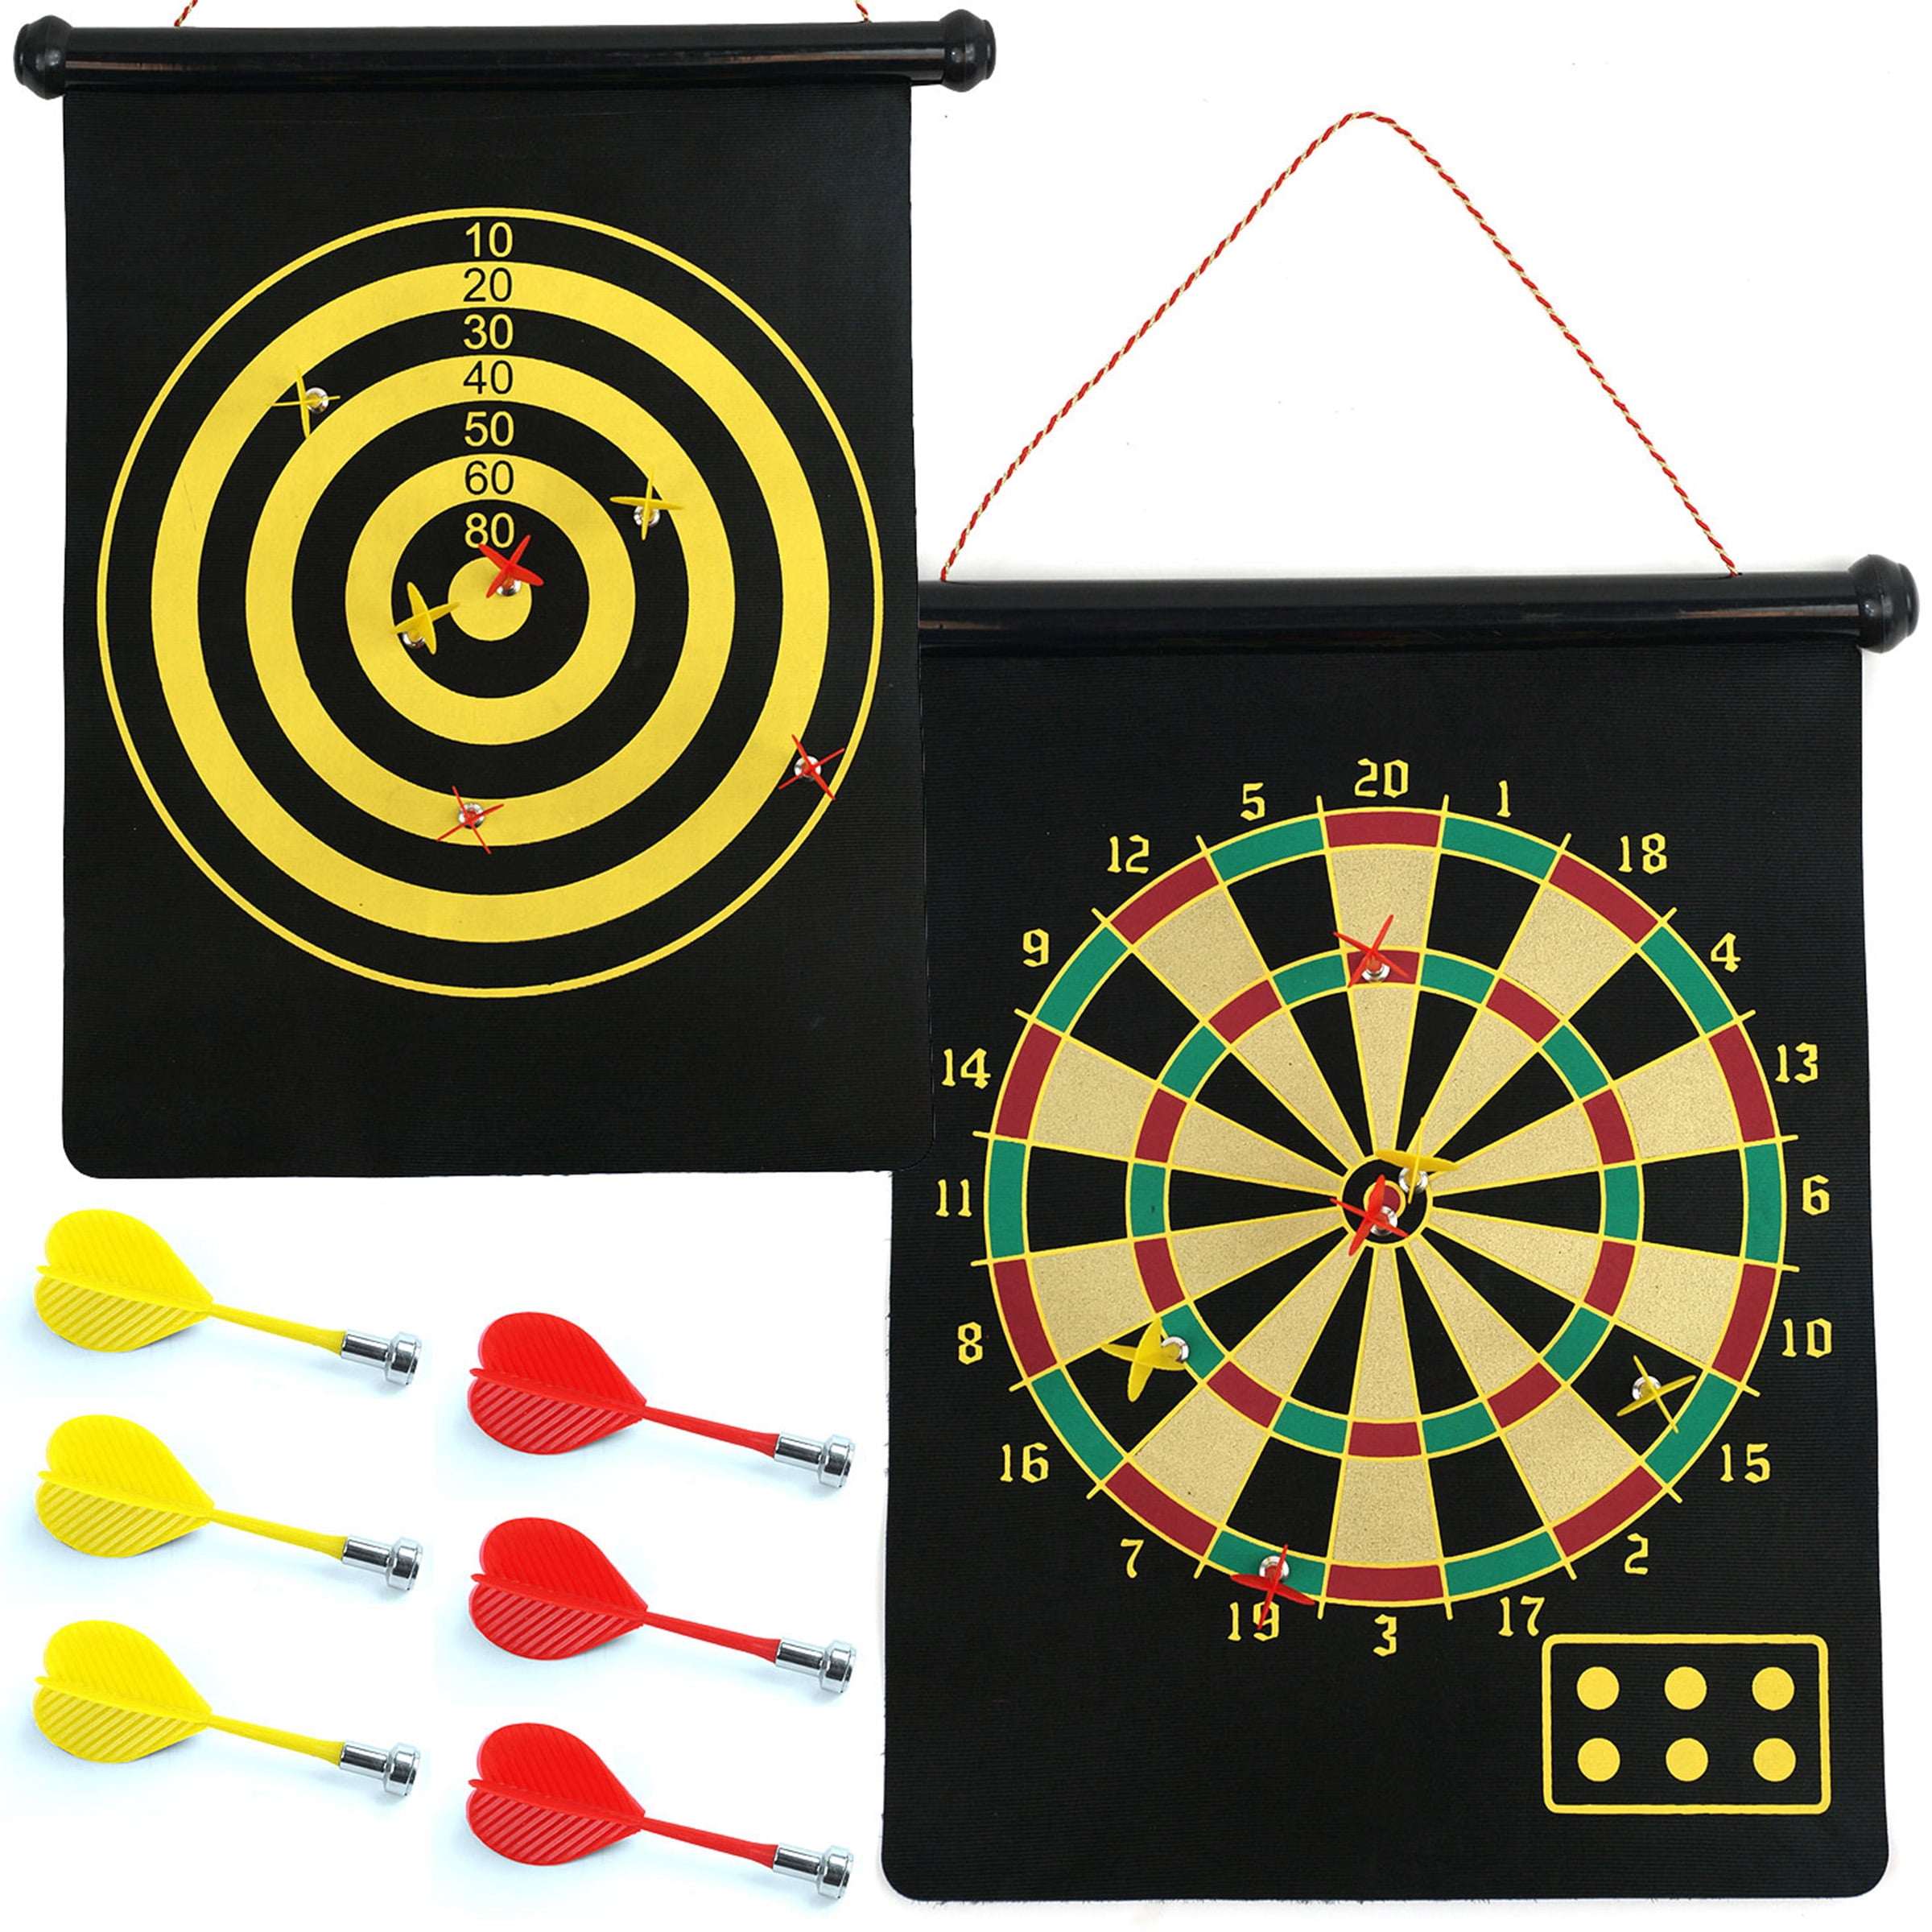 DART BOARD 4 BRASS DARTS CHECKERS NEW Double Sided Game Room Xmas Gift Darts 